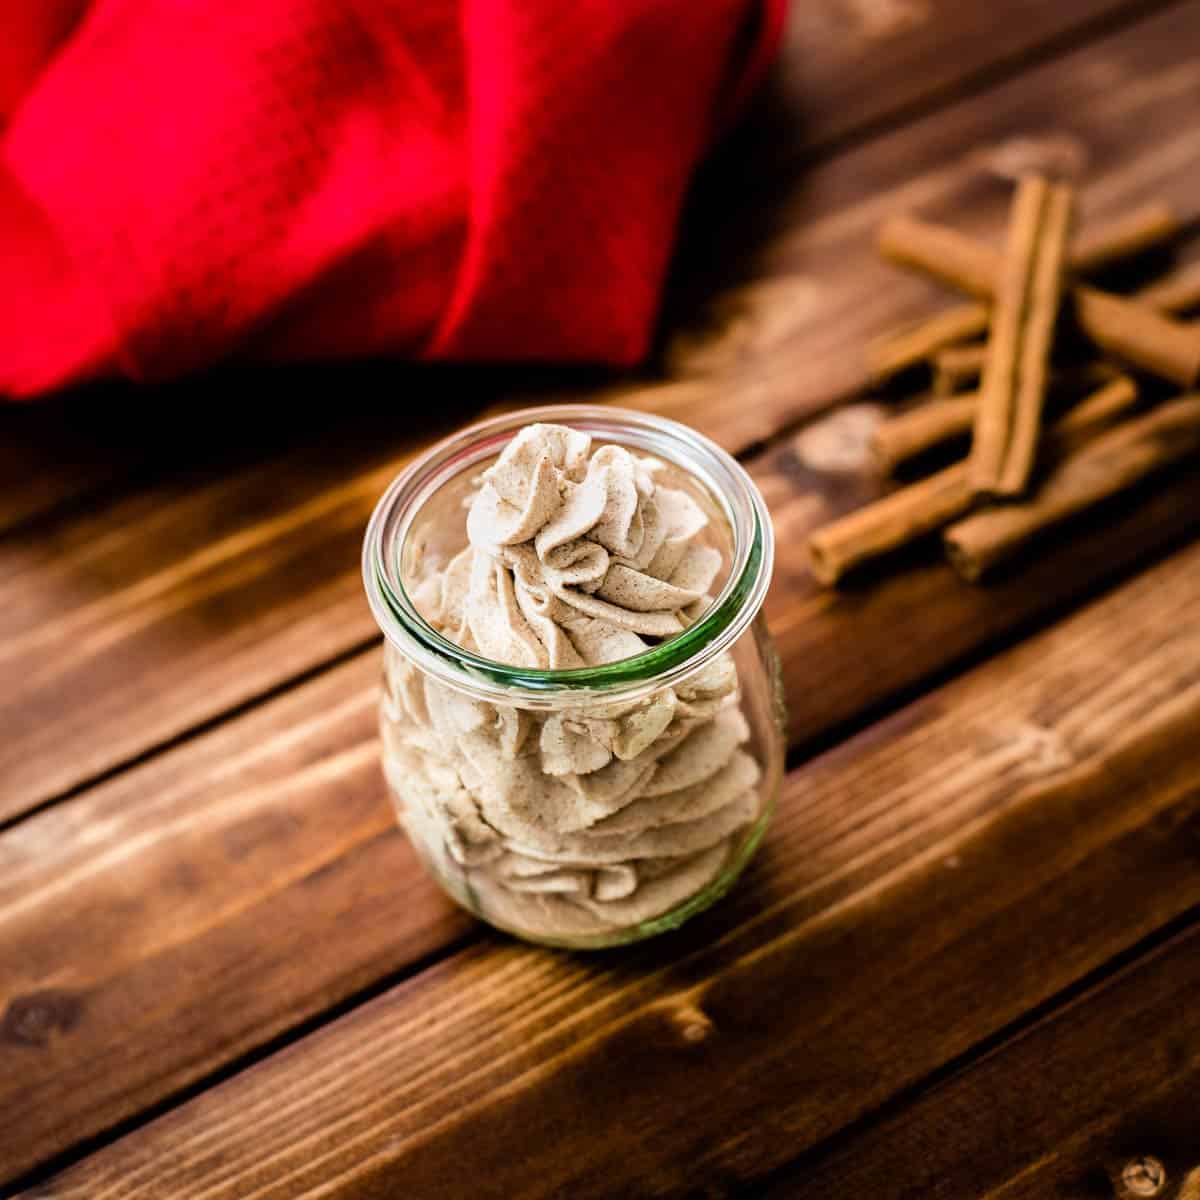 Decadent Cinnamon Whipped Cream Topping